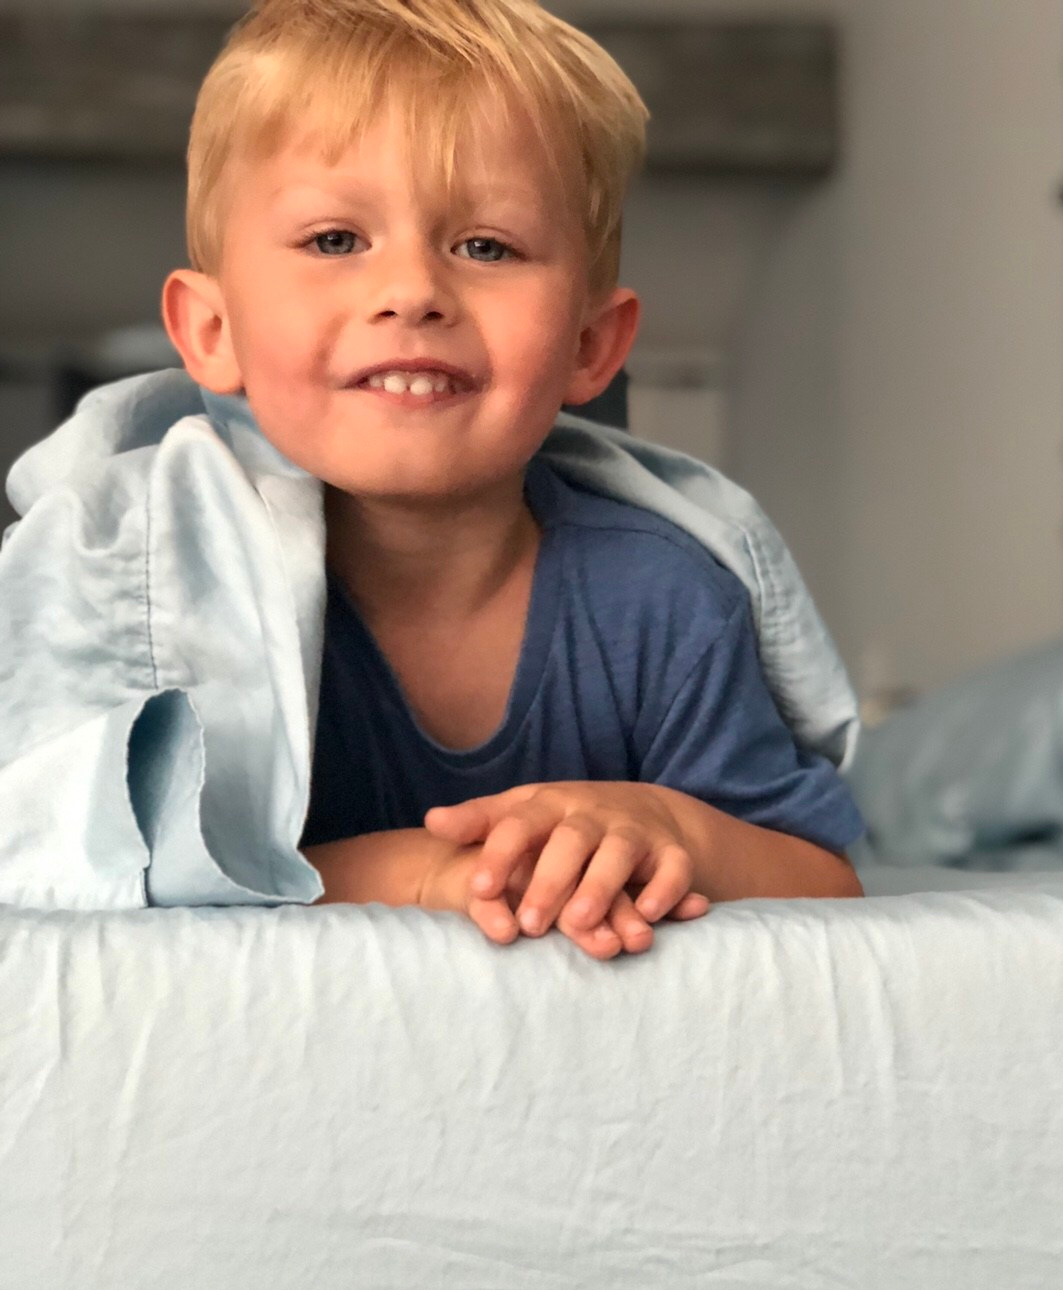 Toddler in bed